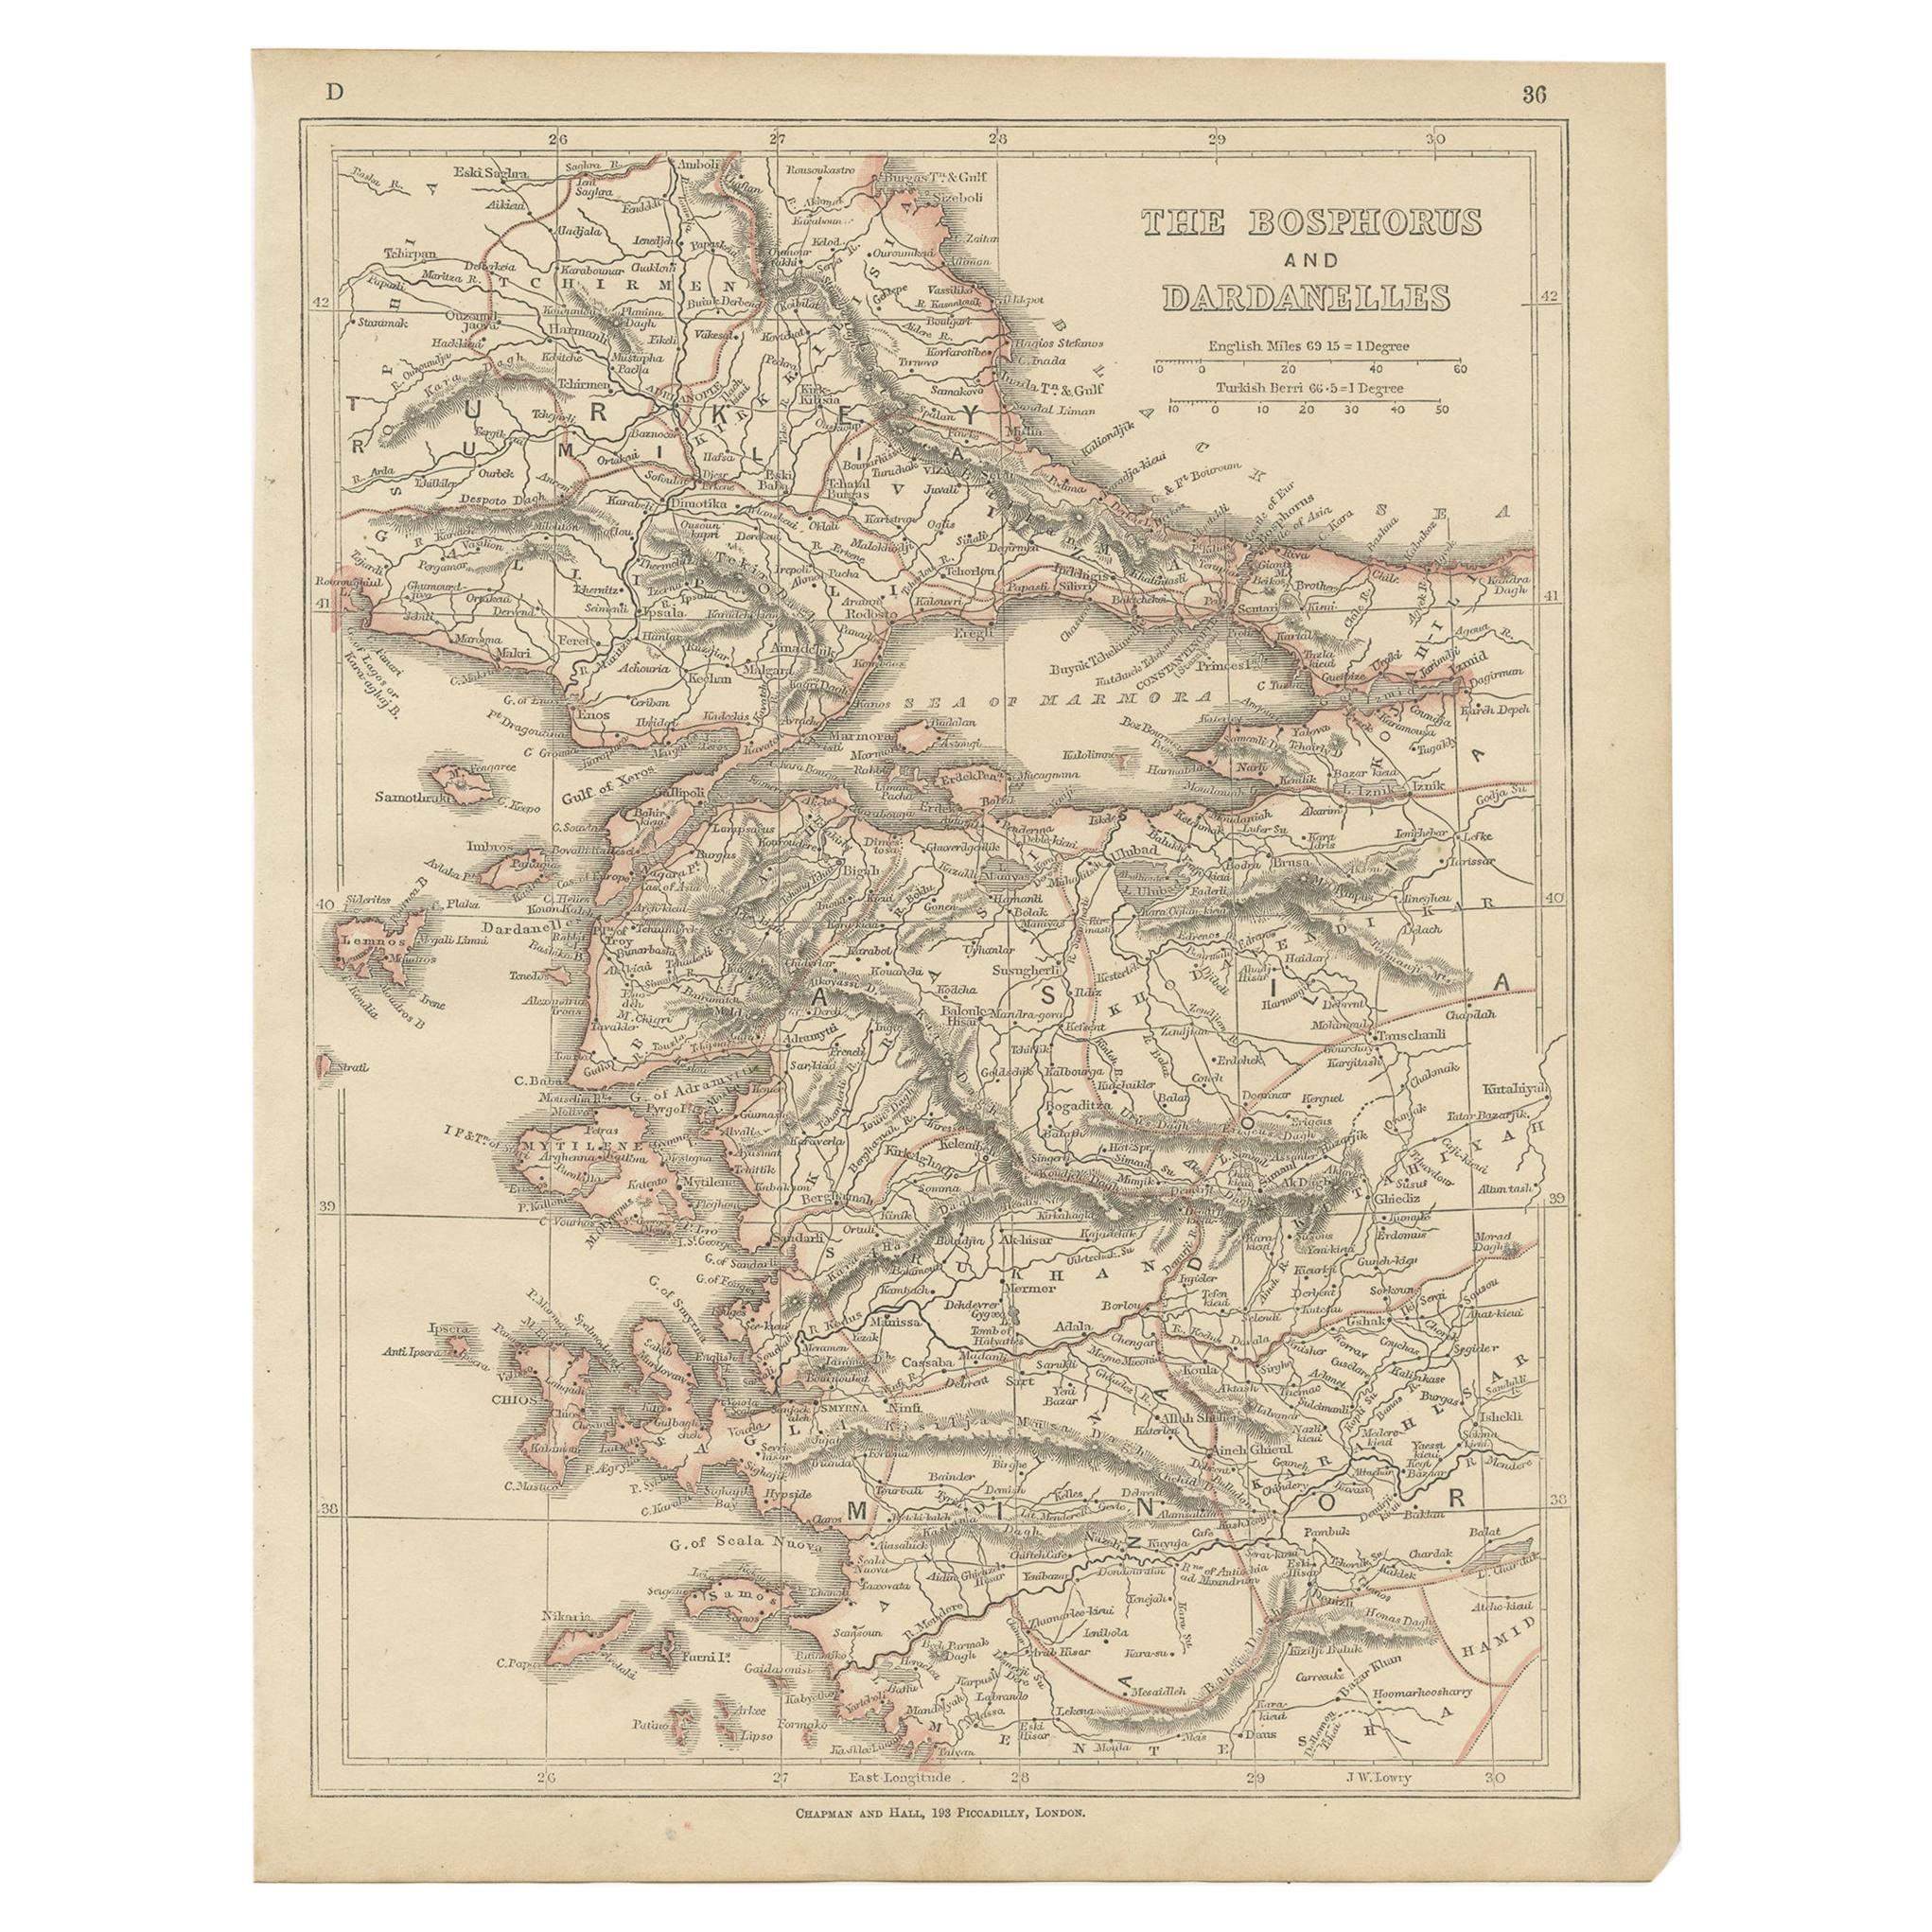 Antique Map of the Bosporus and Dardanelles, 1852